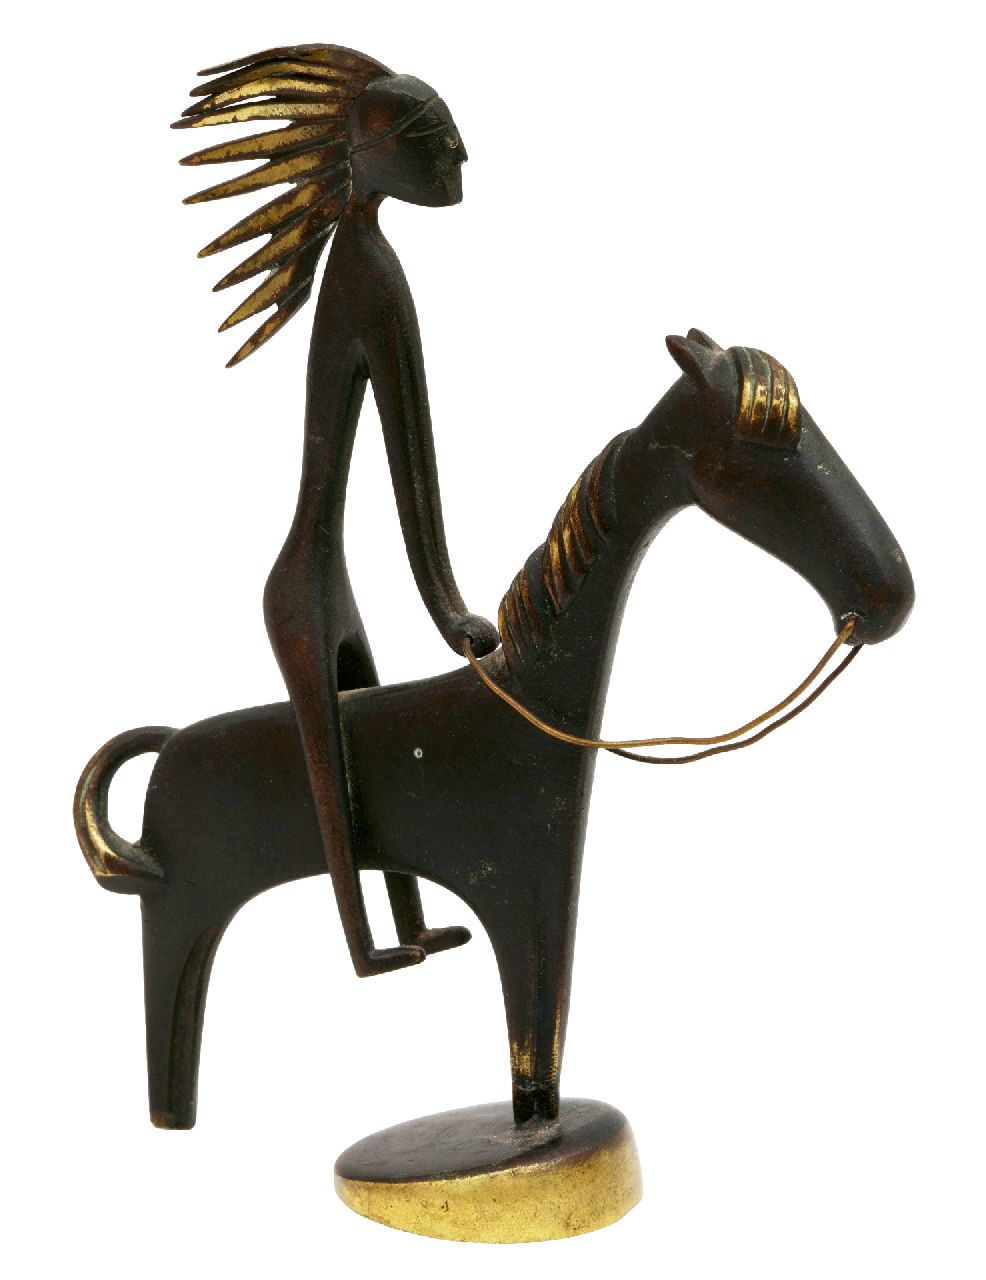 Hagenauer K.  | Karl Hagenauer | Sculptures and objects offered for sale | Indian on horseback, patinated brass 13.1 x 10.1 cm, made circa 1950